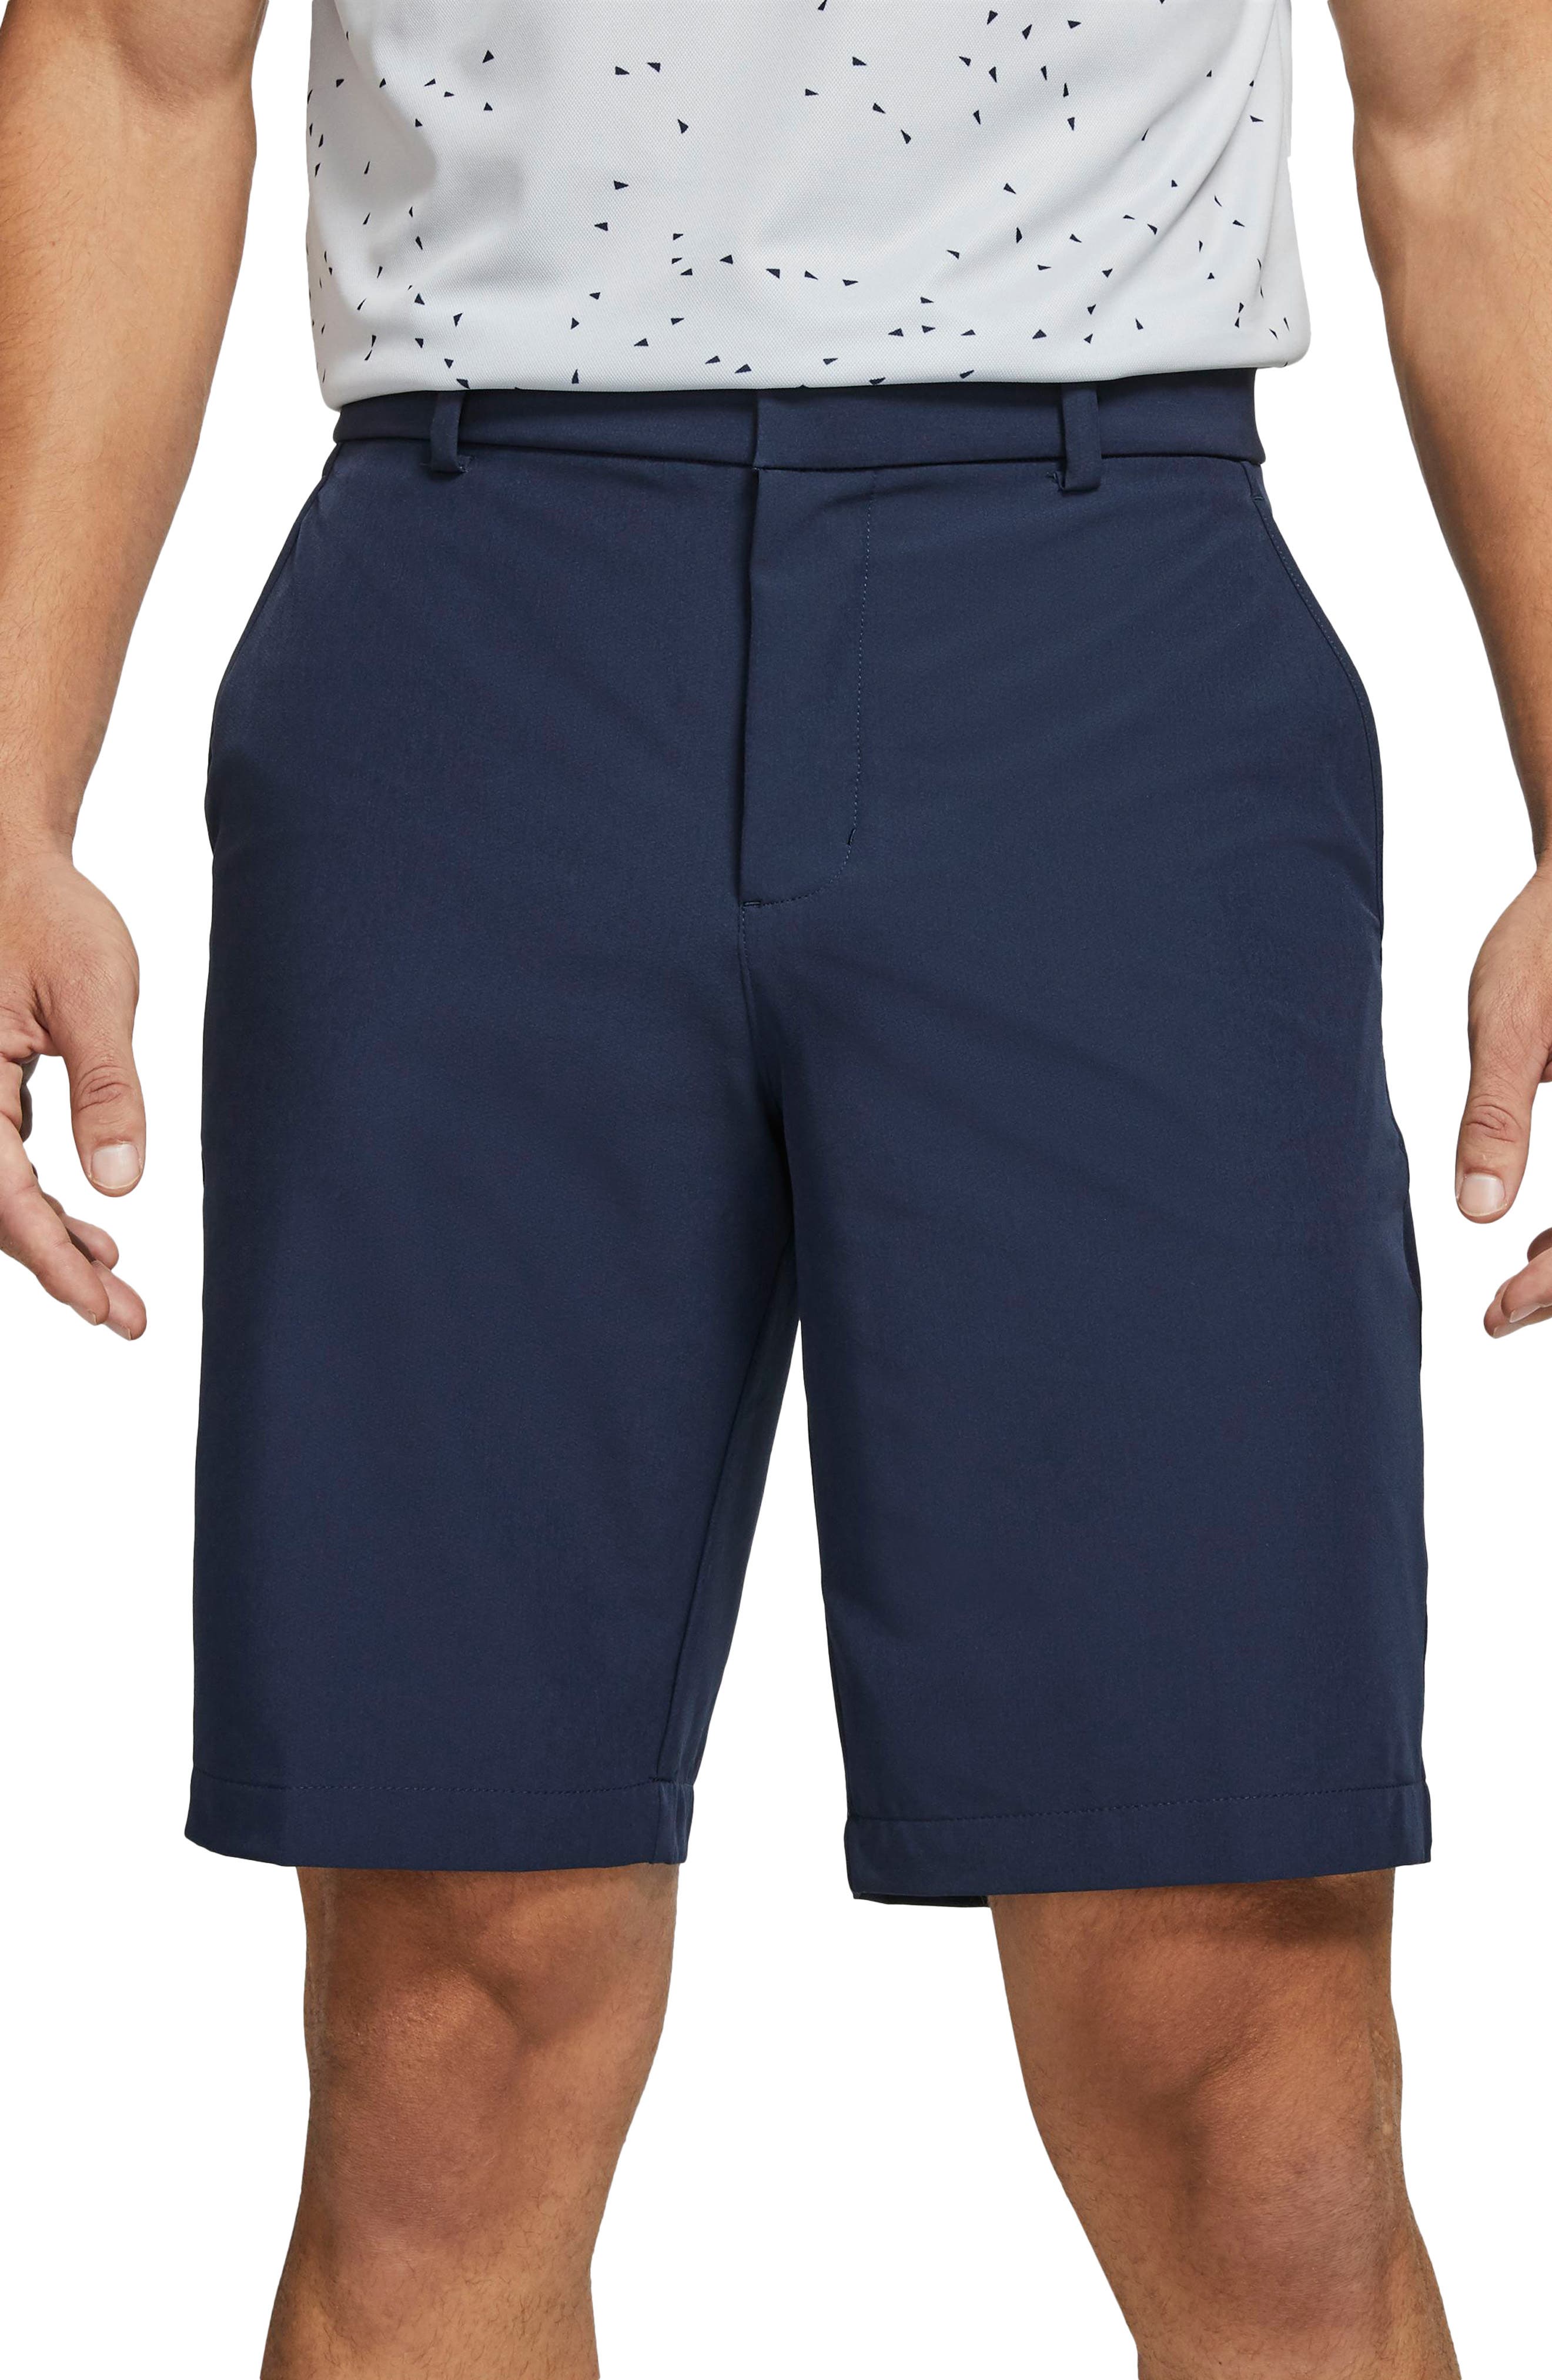 UPC 194501221726 product image for Nike Dri-FIT Flat Front Golf Shorts in Obsidian/Obsidian at Nordstrom, Size 42 | upcitemdb.com